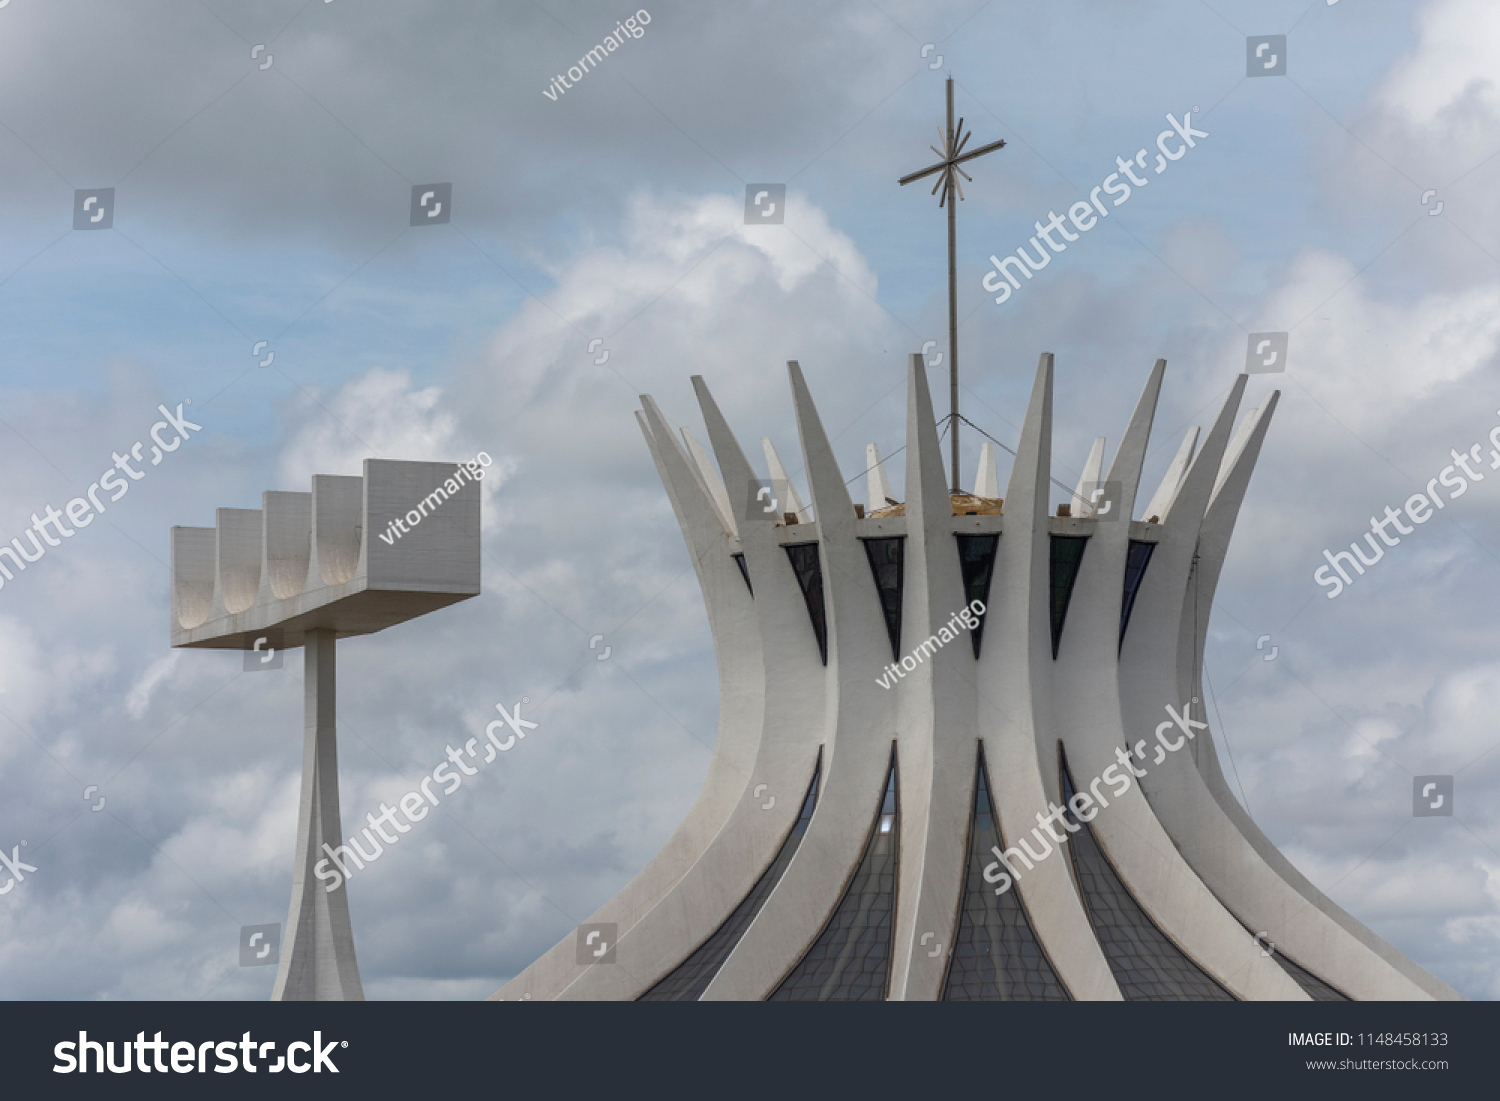 Catedral Metropolitana (Metropolitan Cathedral) modern architecture building with bell tower in central Brasilia, Federal District, capital city of Brazil #1148458133